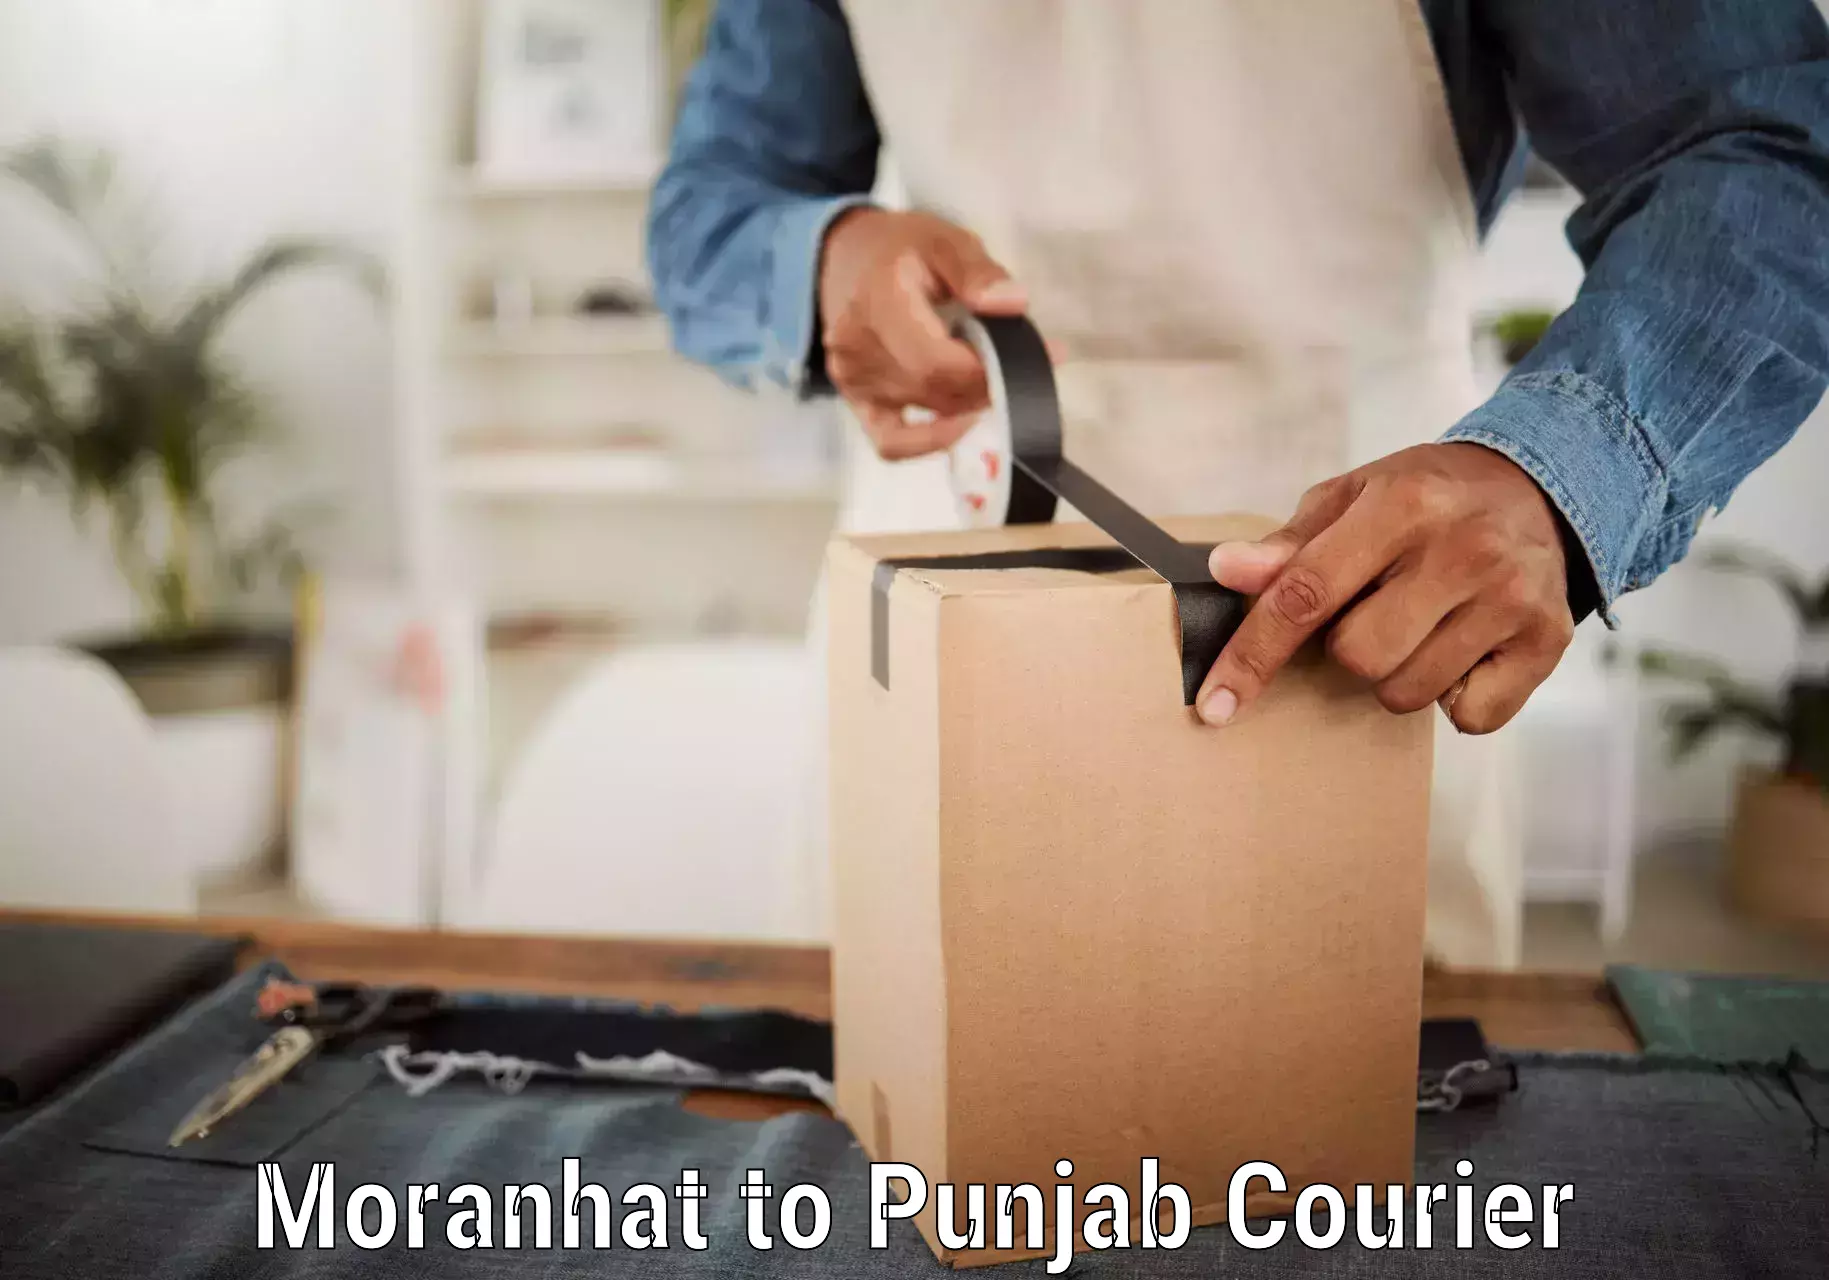 State-of-the-art courier technology Moranhat to Kotkapura